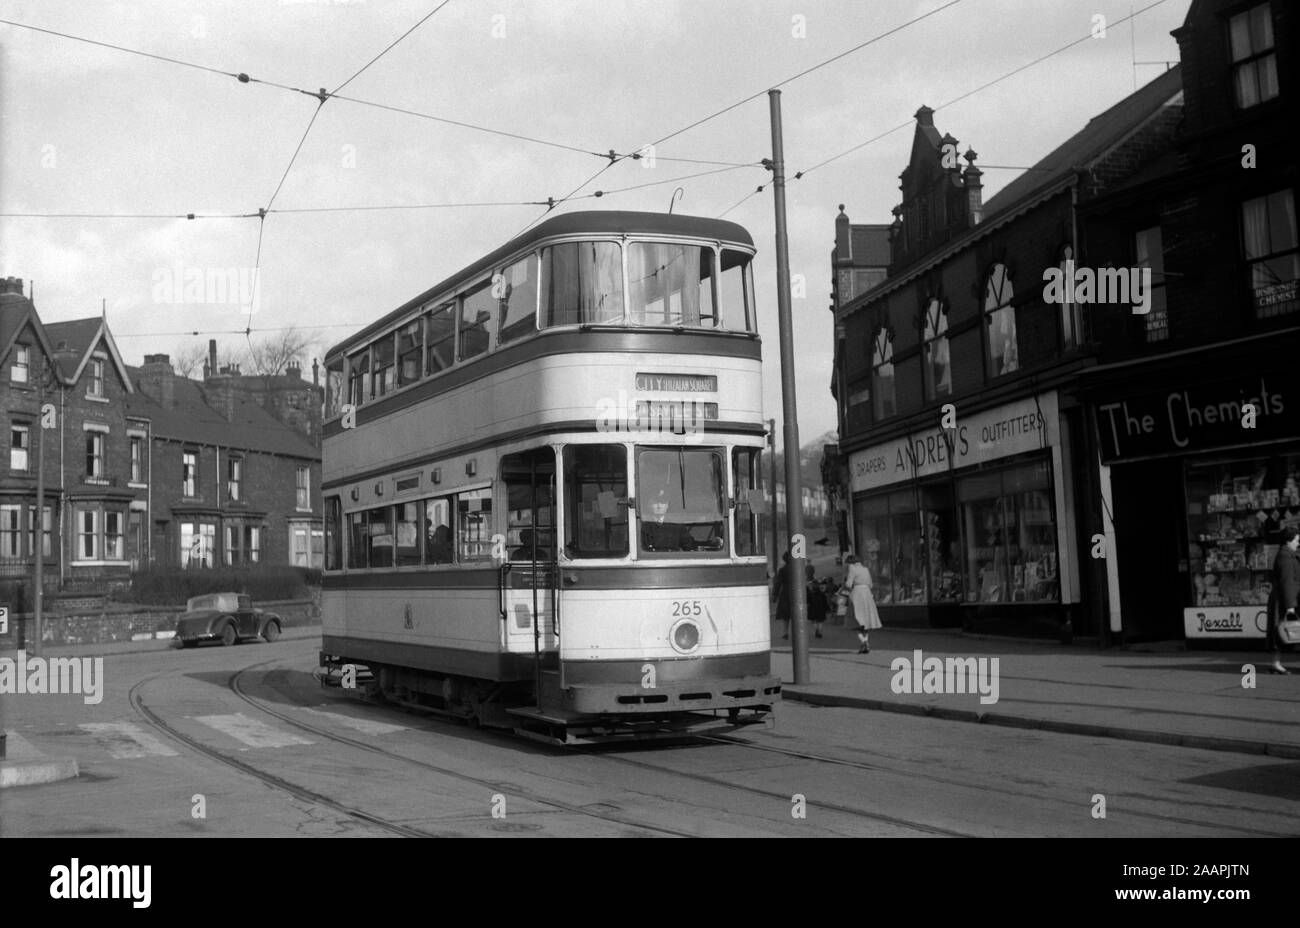 Sheffield Corporation Standard Tram no 265 on Page Hall Road and on route to the city centre via Saville Street. Image taken during the 1950s. Stock Photo